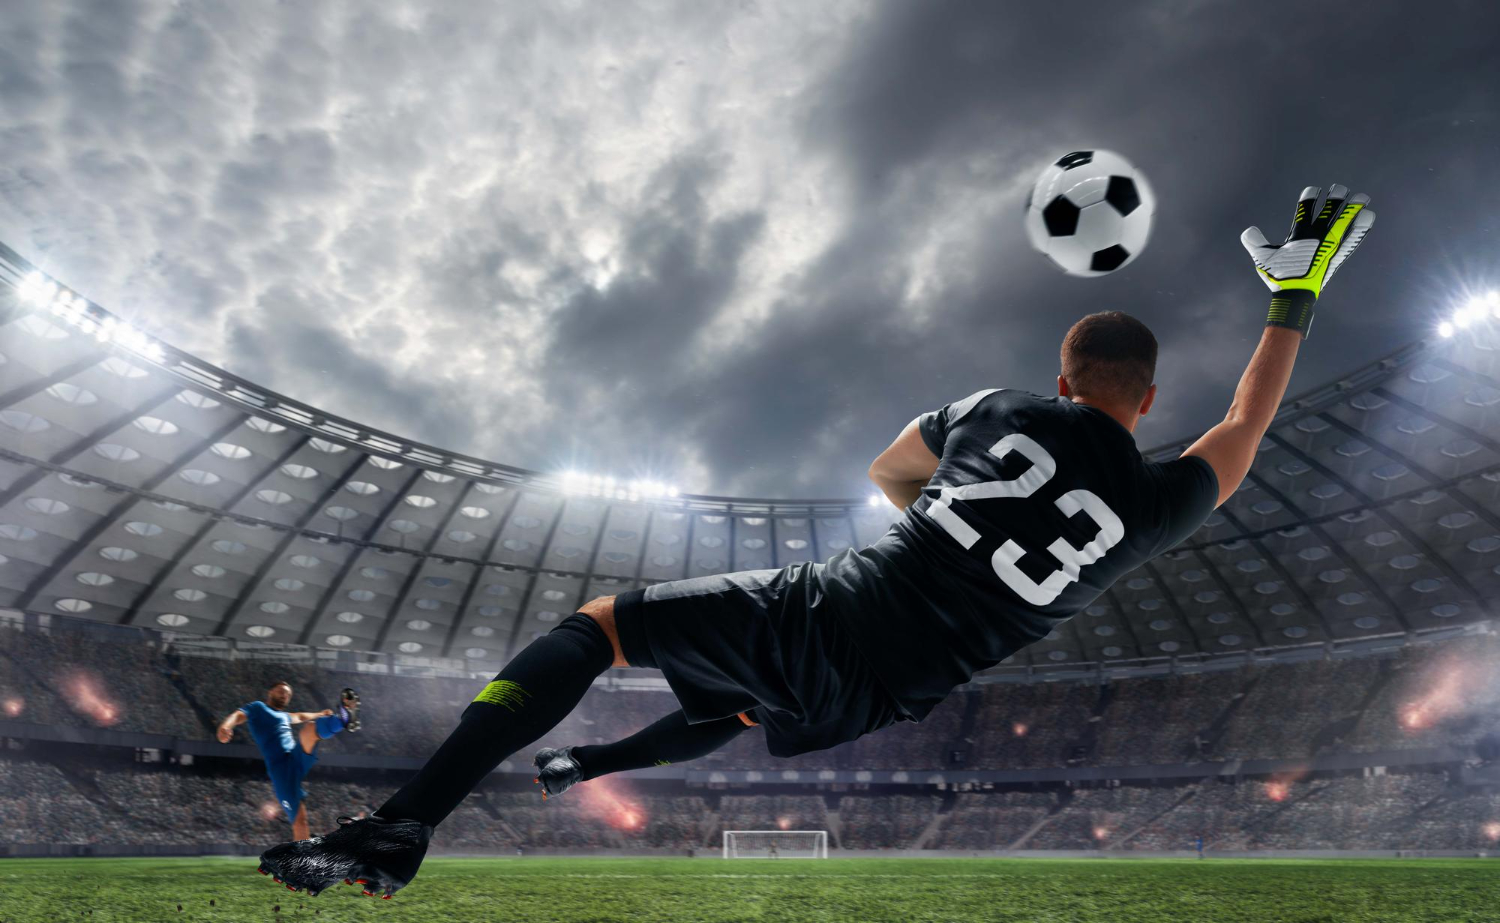 The Best Football Betting Strategies To Maximize Your Winnings